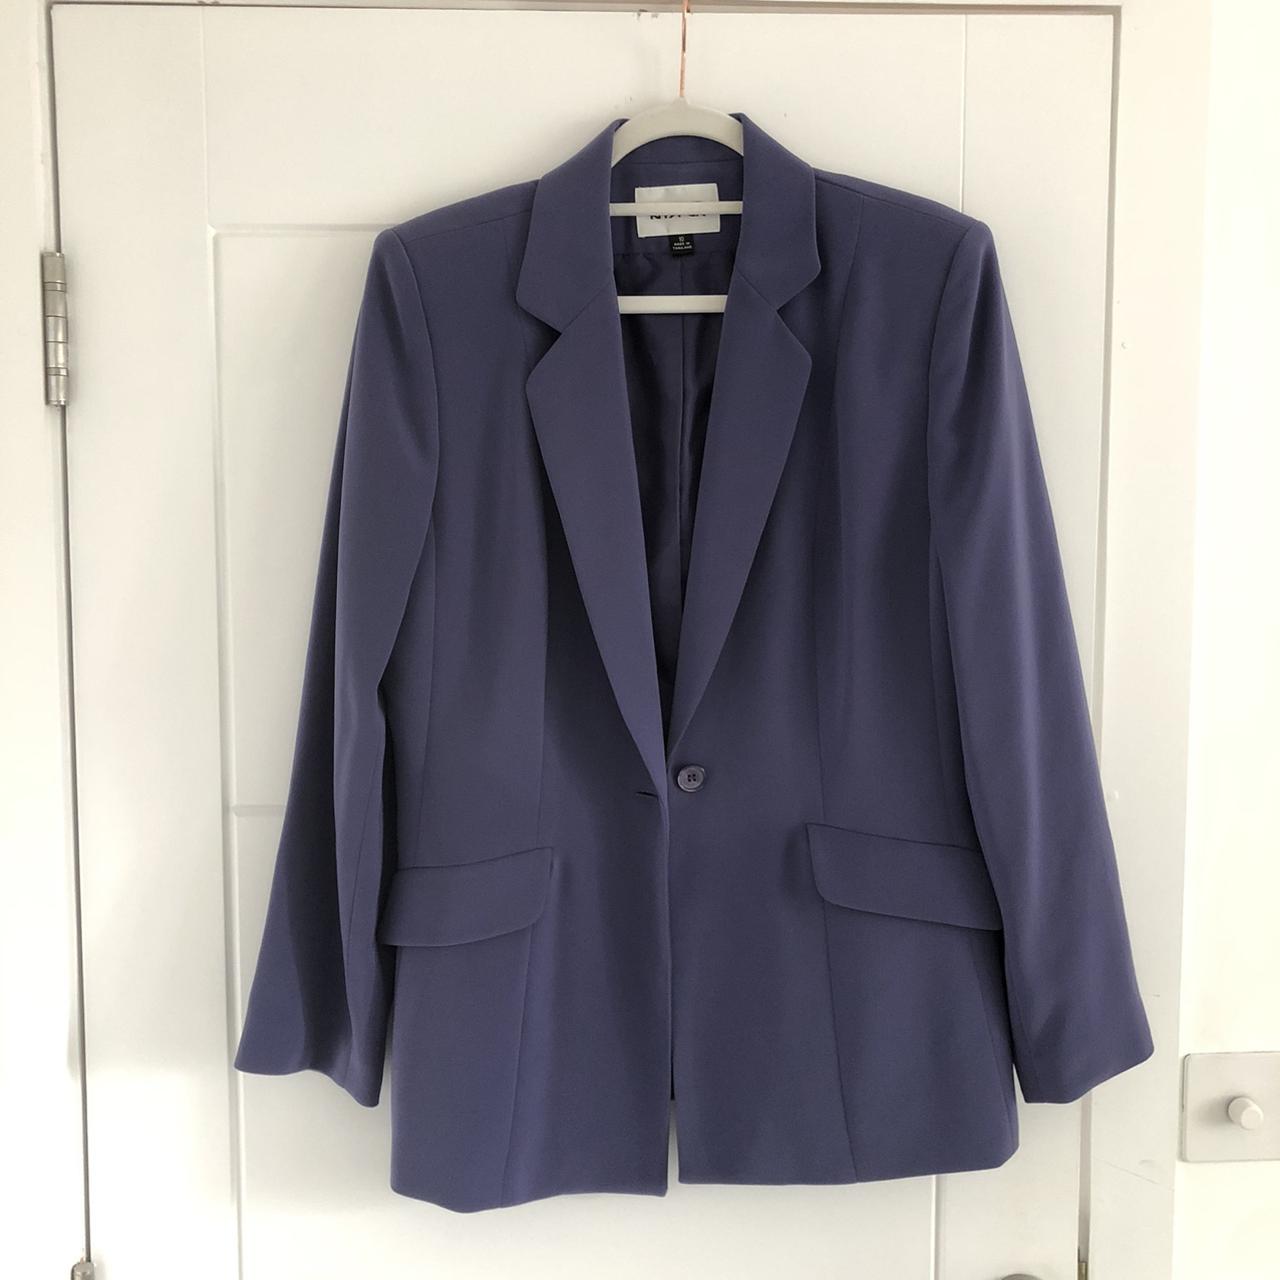 VINTAGE PURPLE BLAZER 💜 bright colours are really in... - Depop